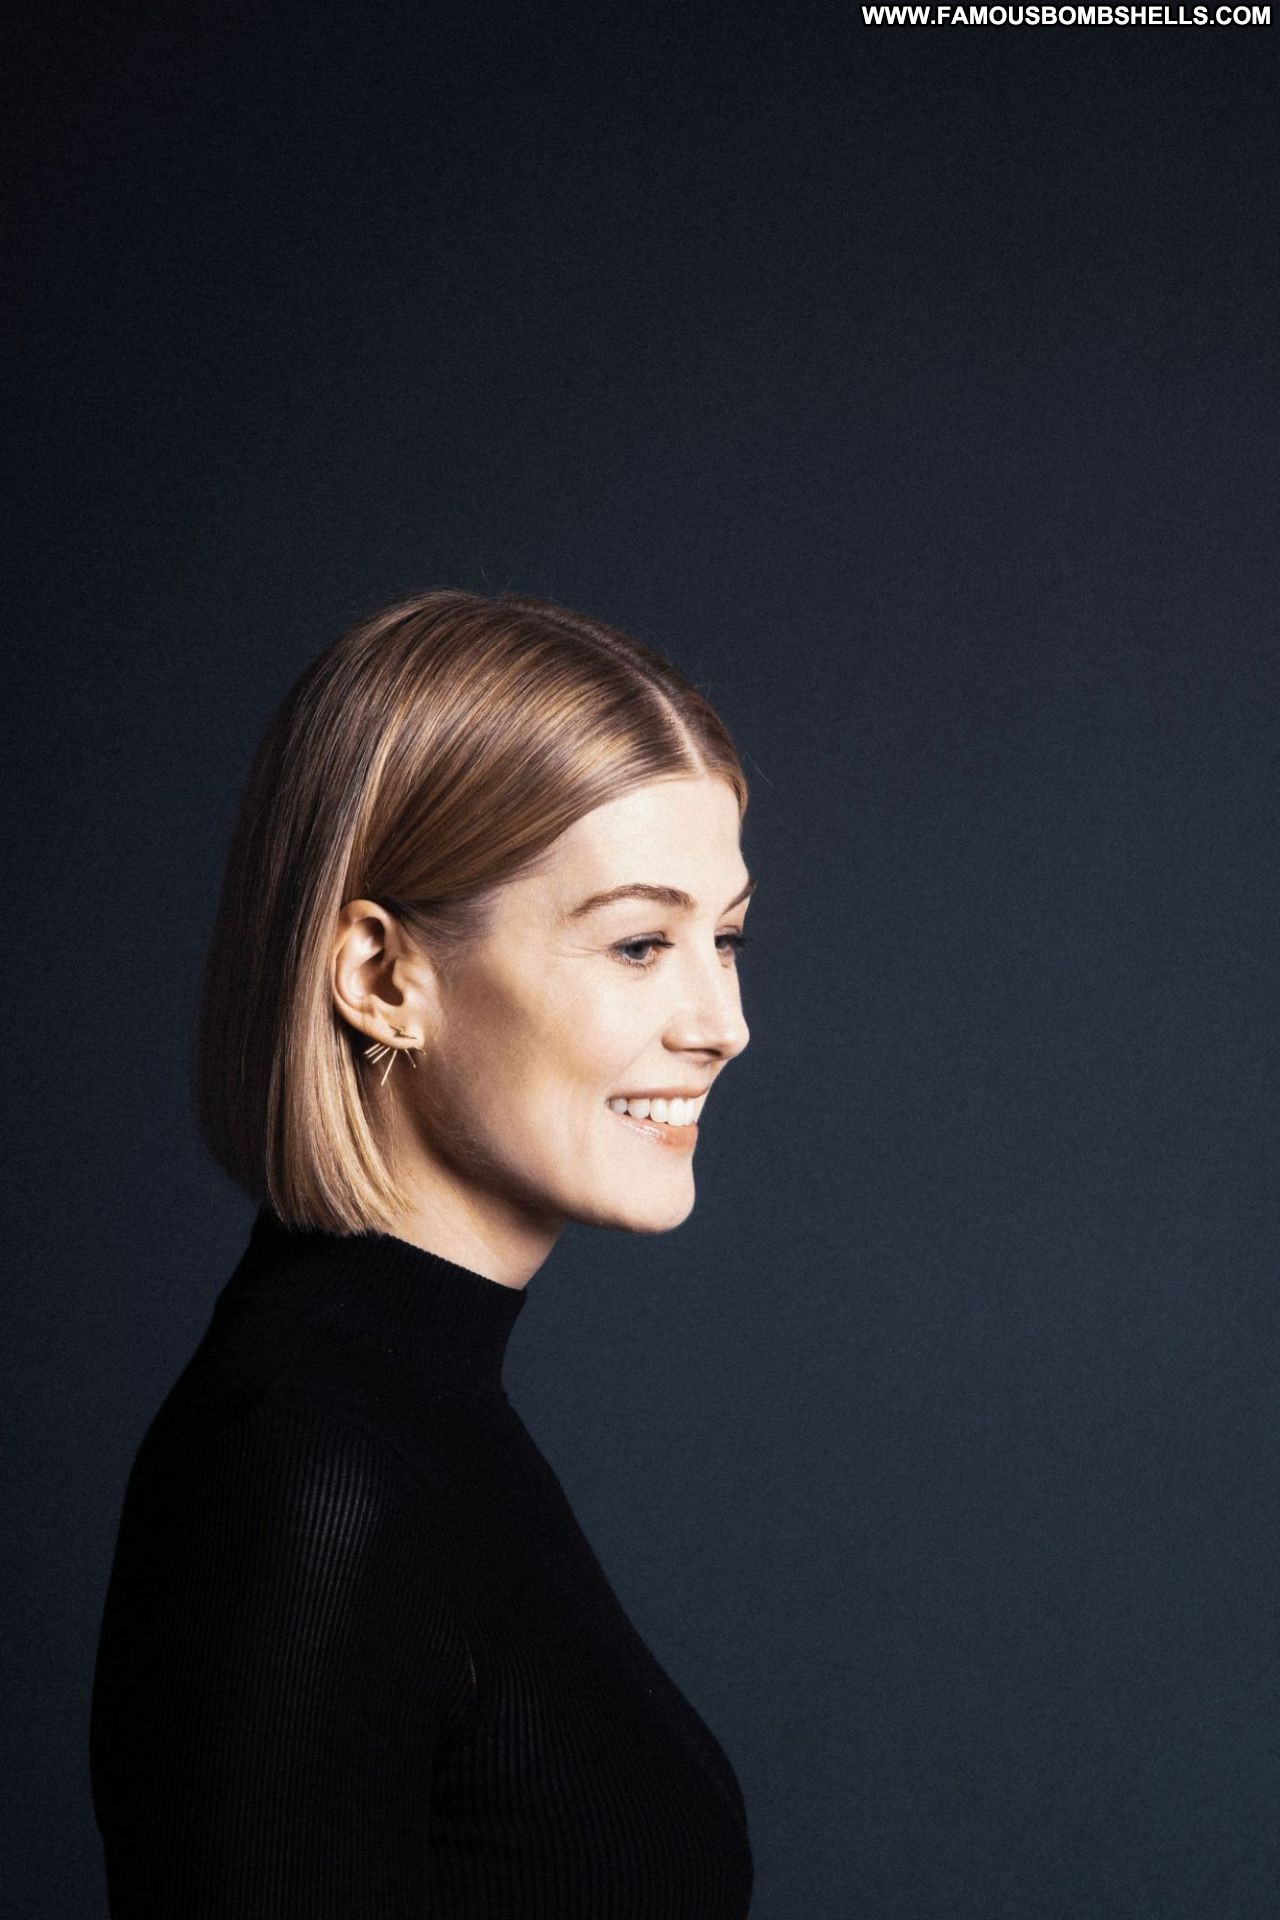 Rosamund pike hot picture